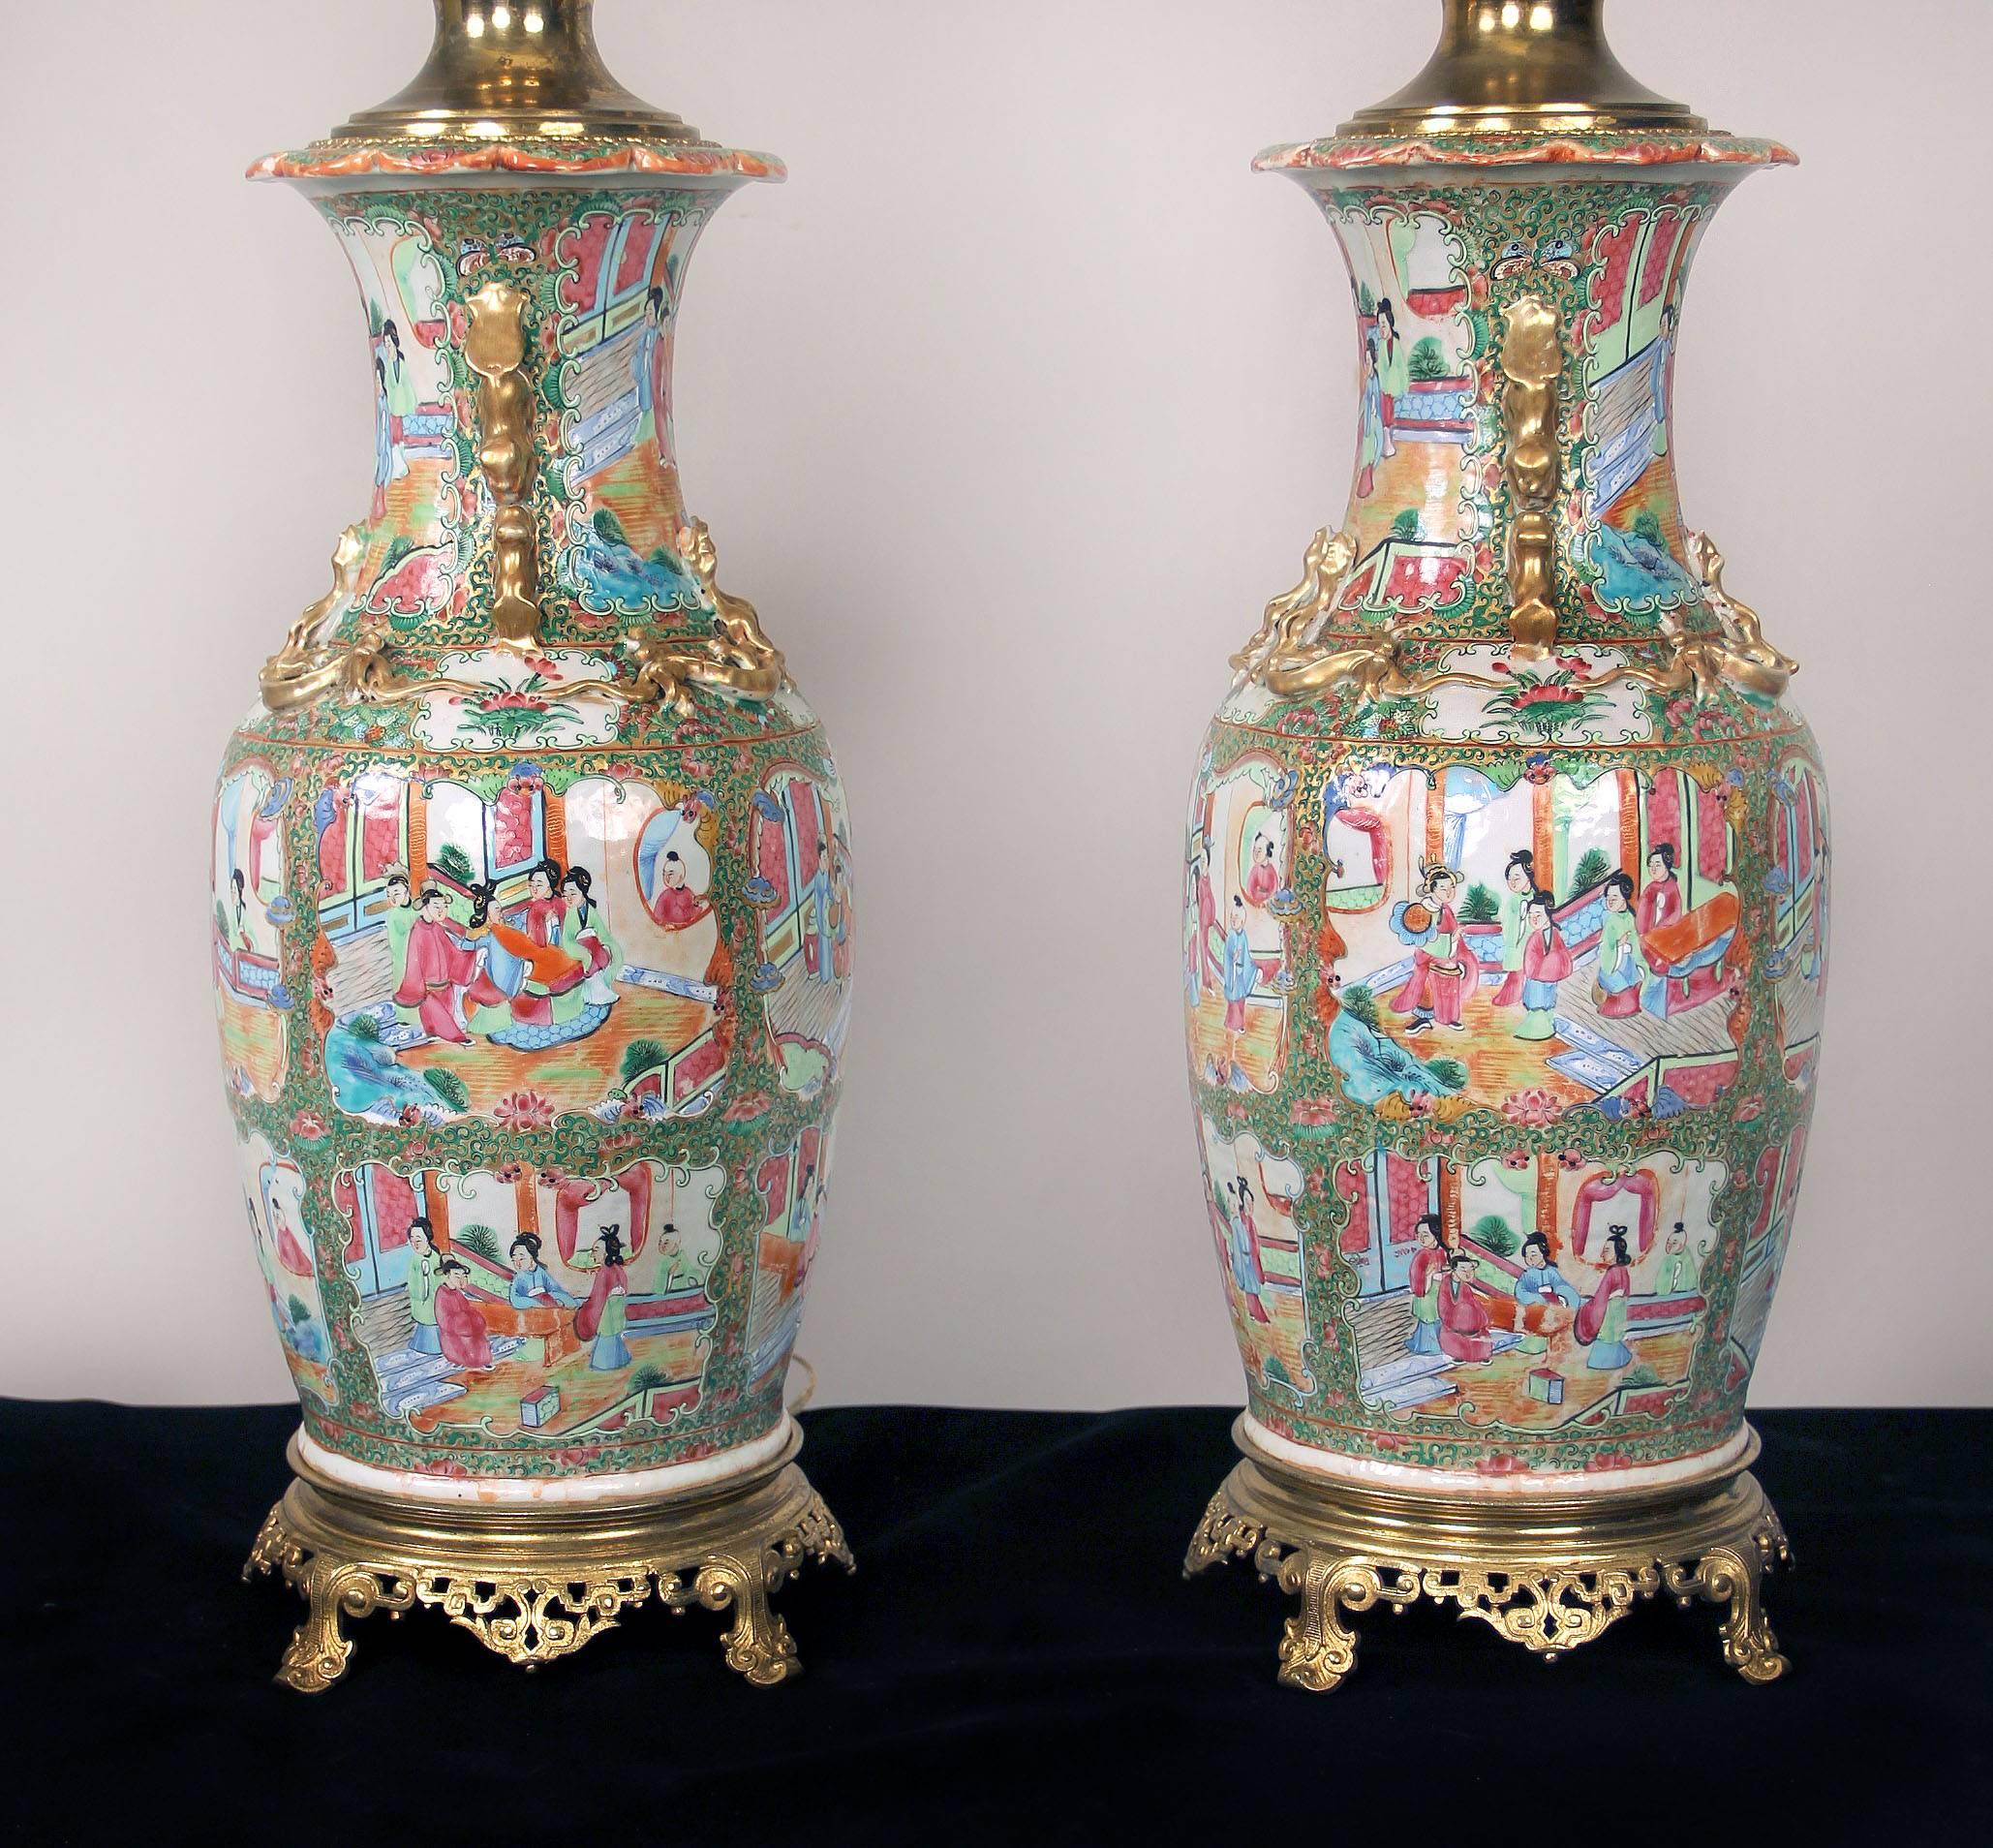 A pair of late 19th century French gilt bronze-mounted Chinese Canton porcelain lamps

Painted interior scenes with many people, each separated by floral designs, the neck with gilded monkeys and lizards, and sitting on a bronze base.

Measures: